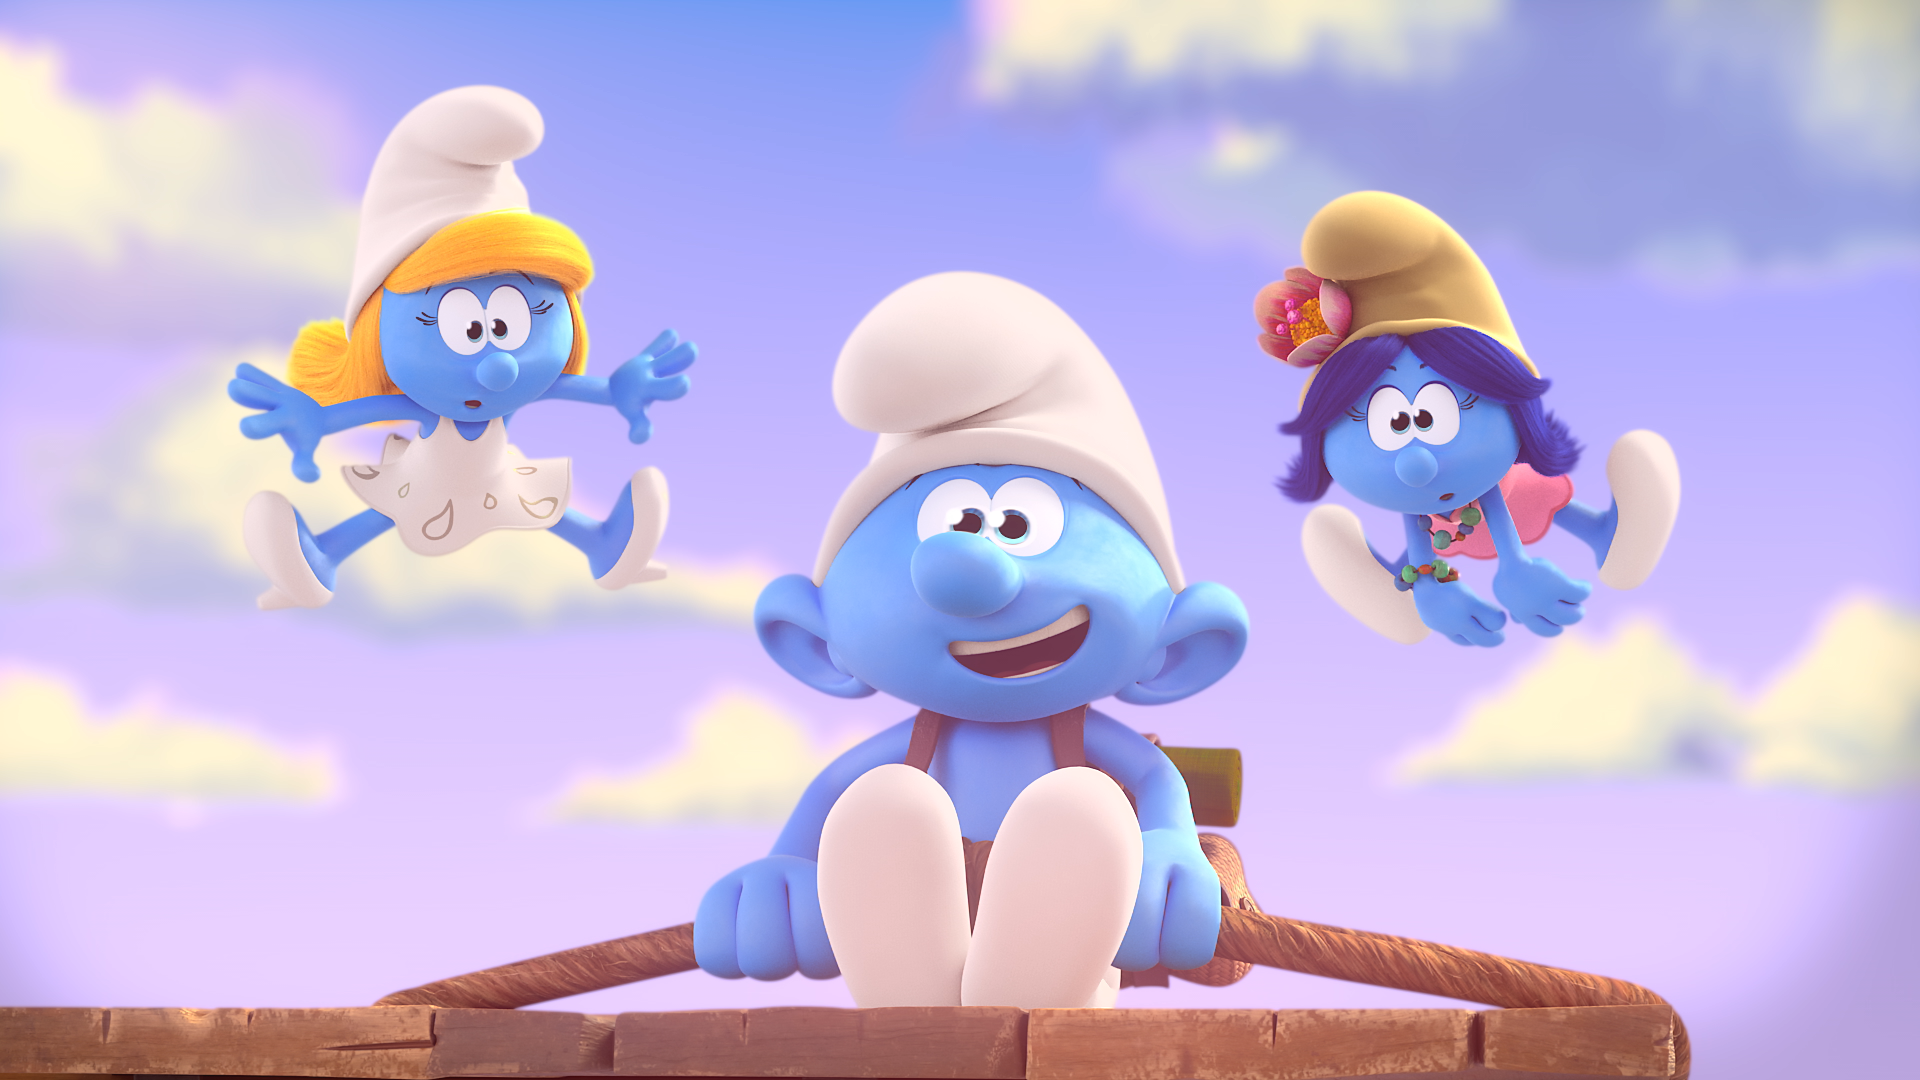 7. "The Smurfs" (2011) - wide 8